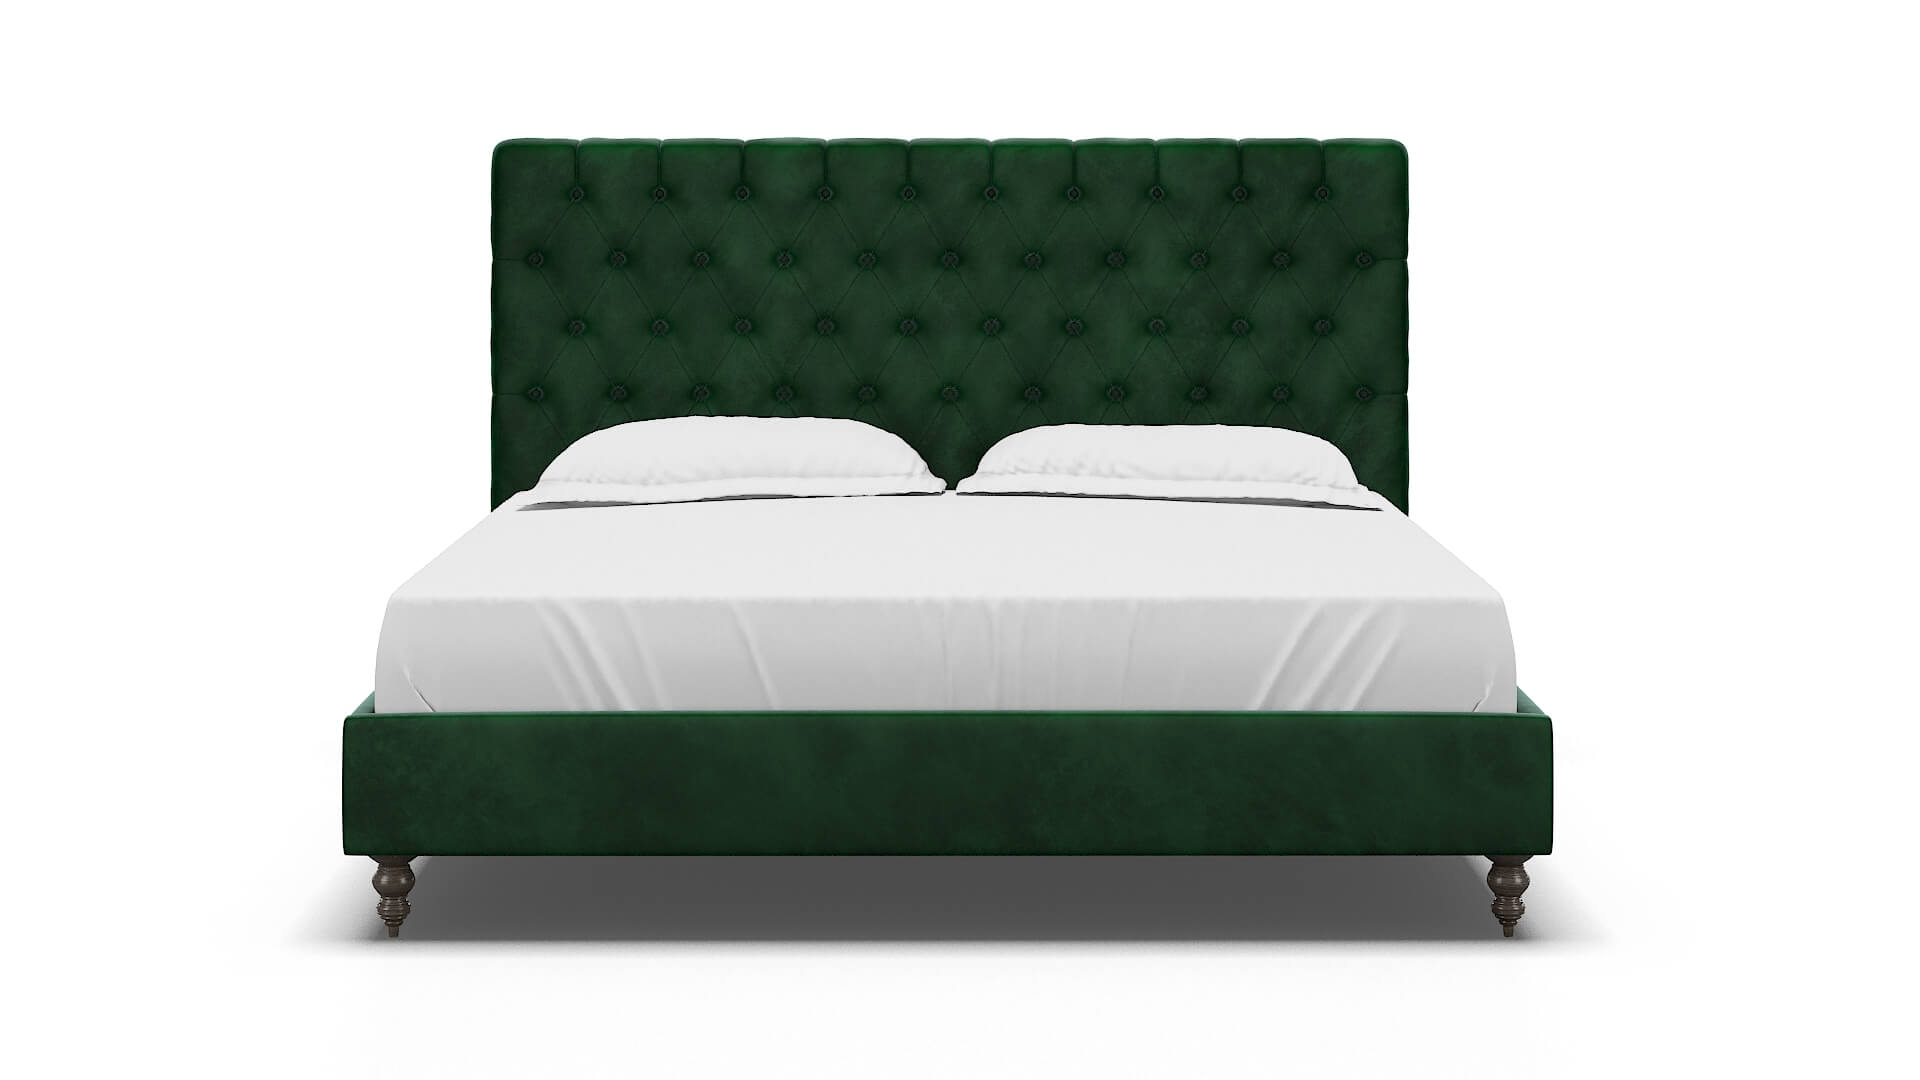 Remy Royale Evergreen Bed King espresso legs 1